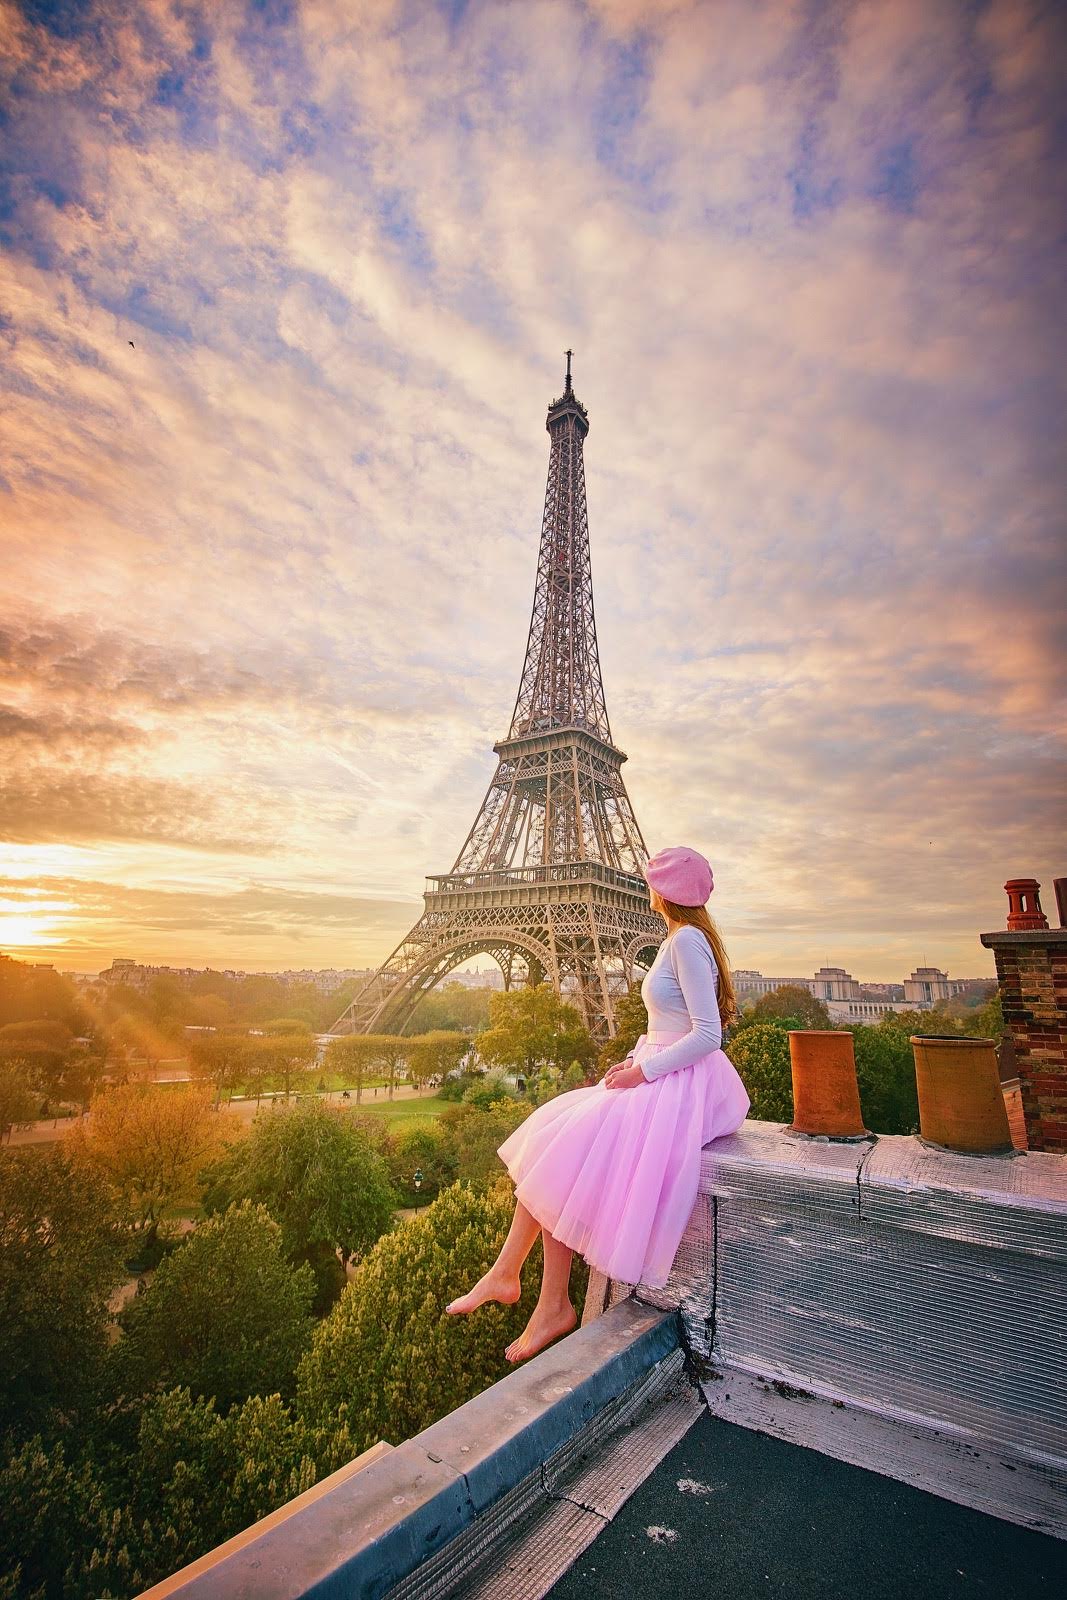 Vivid pink sunset over a woman in a pink skirt and beret sitting on a rooftop overlooking the Eiffel Tower in France.